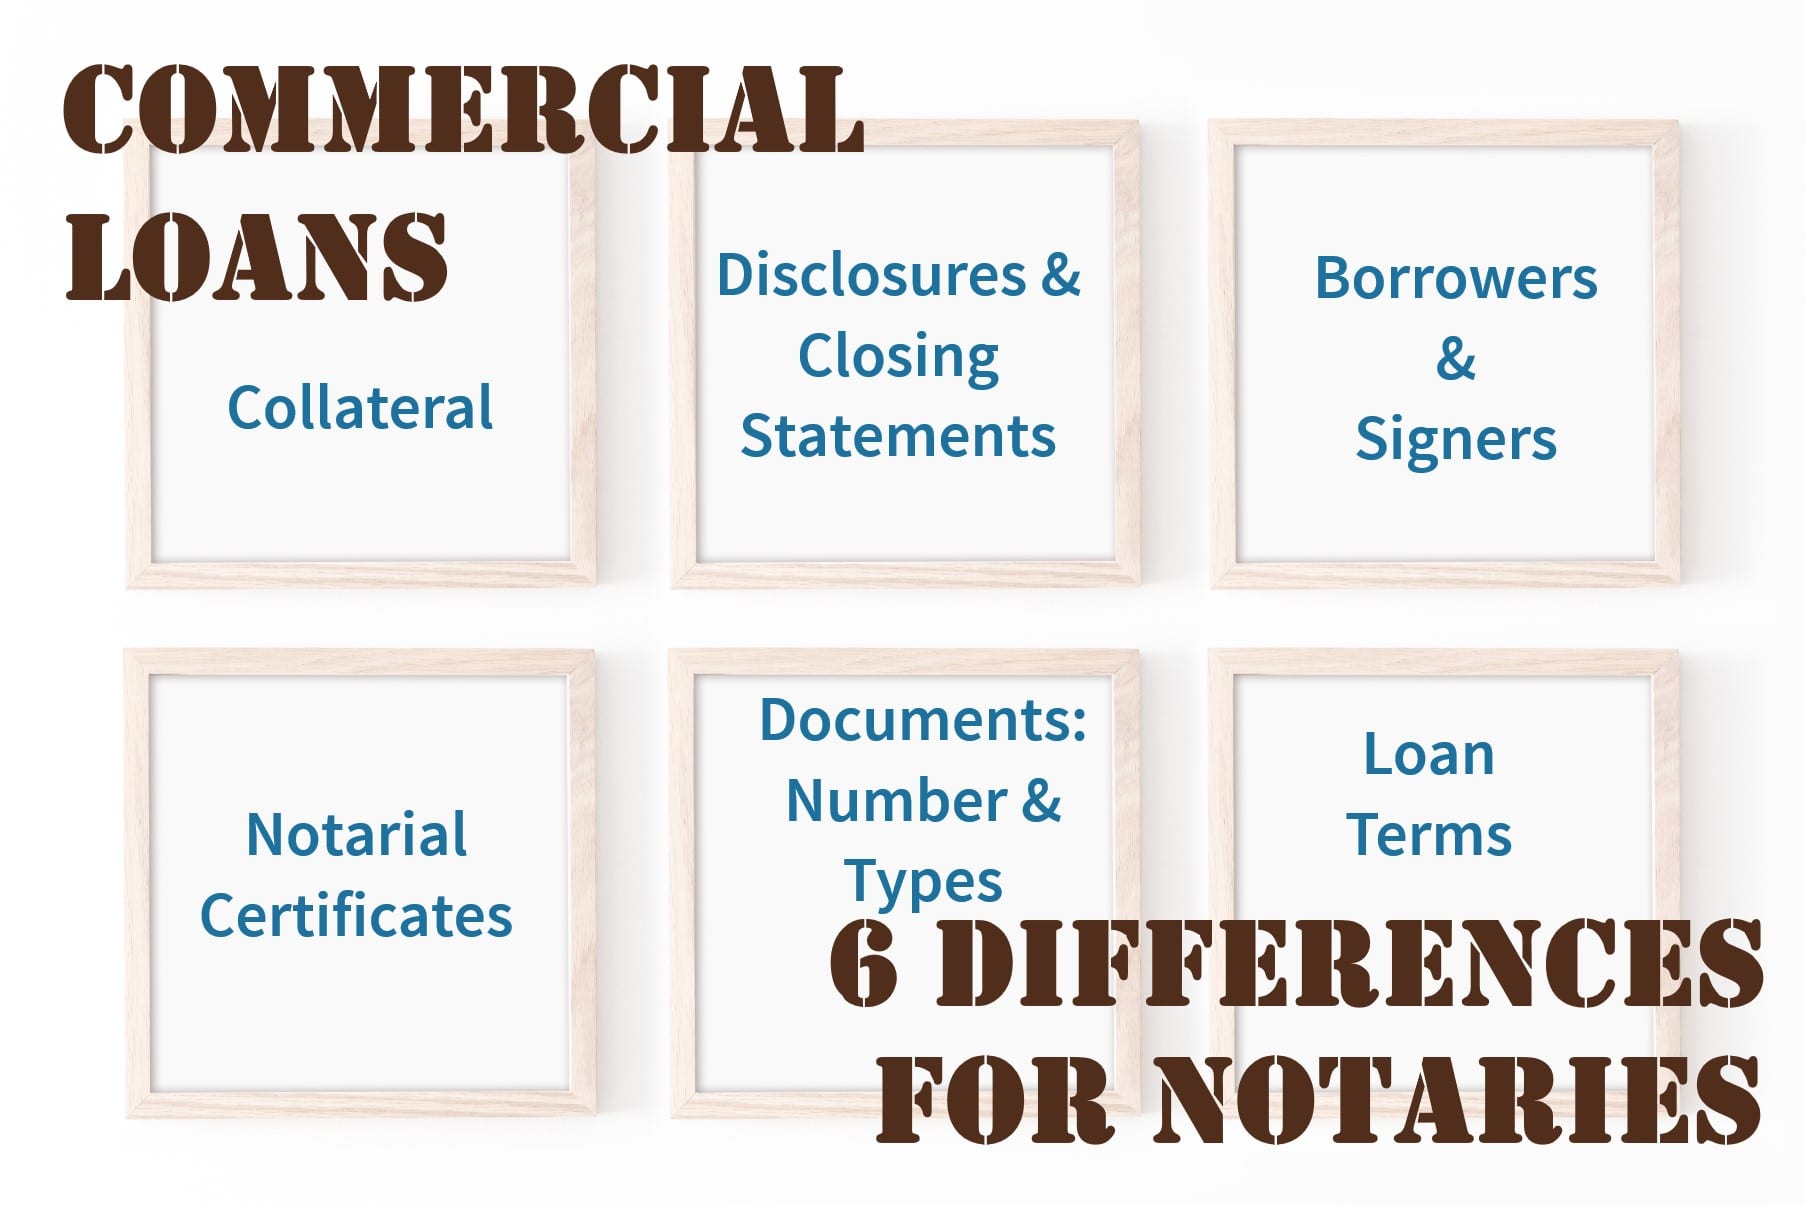 6 differences for notaries